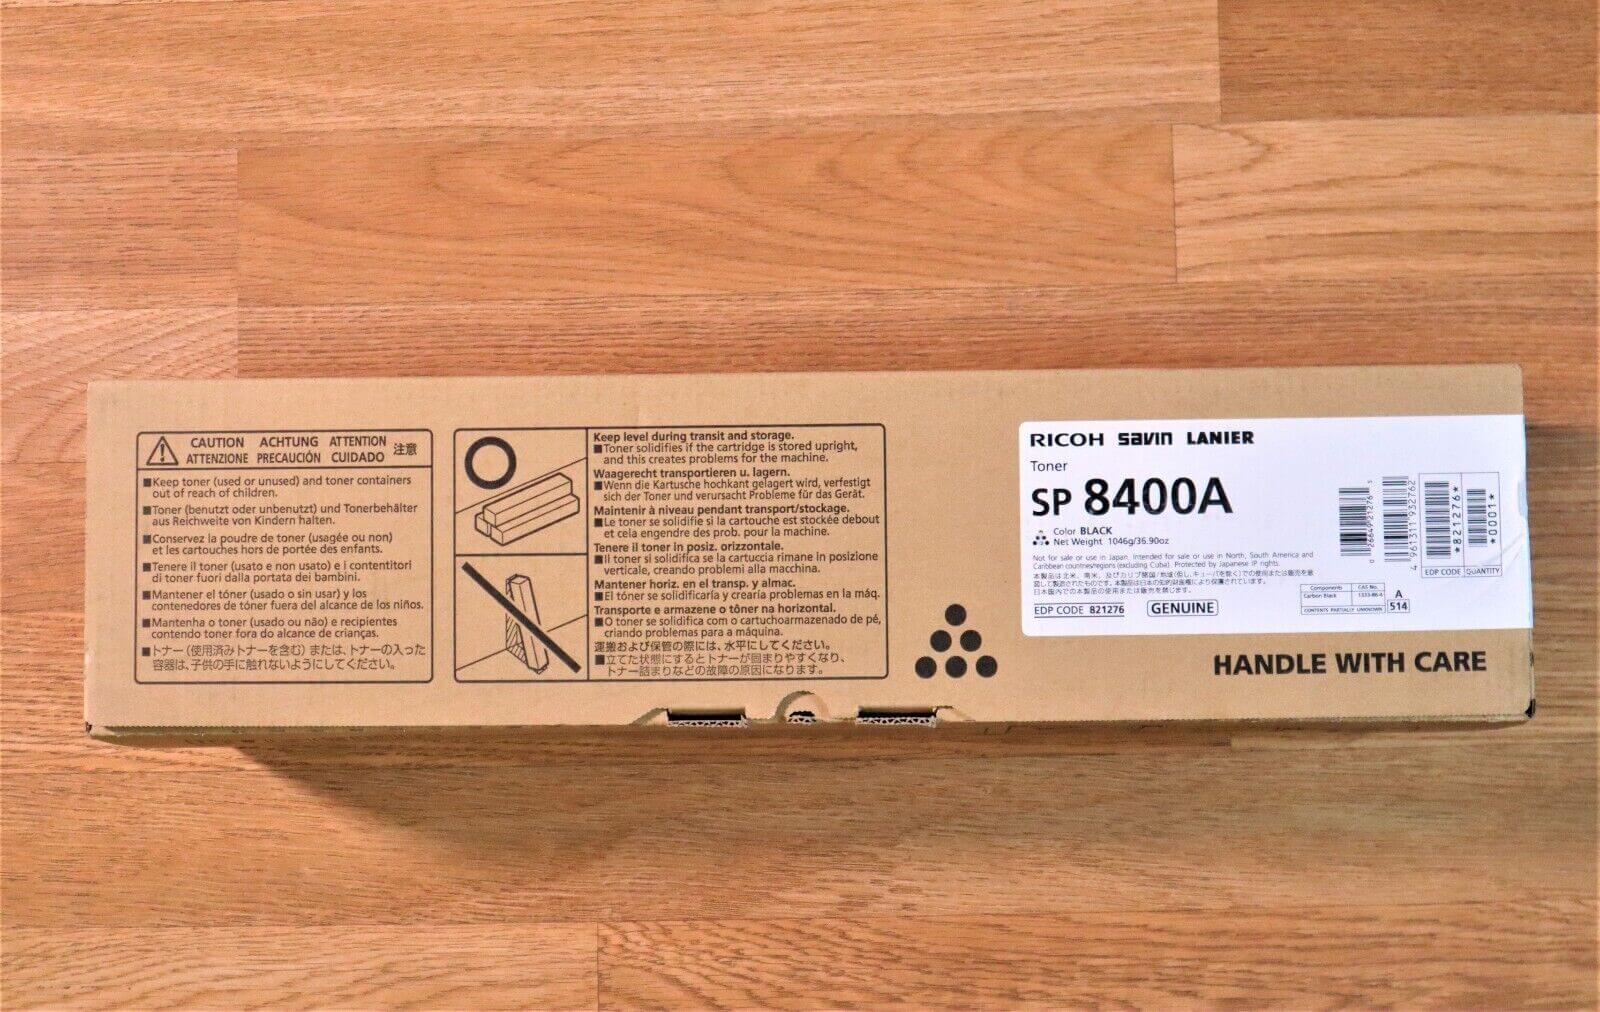 Genuine NEW Ricoh SP 8400A  Black Toner Cartridge EDP.821276 Same Day Shipping!! - copier-clearance-center